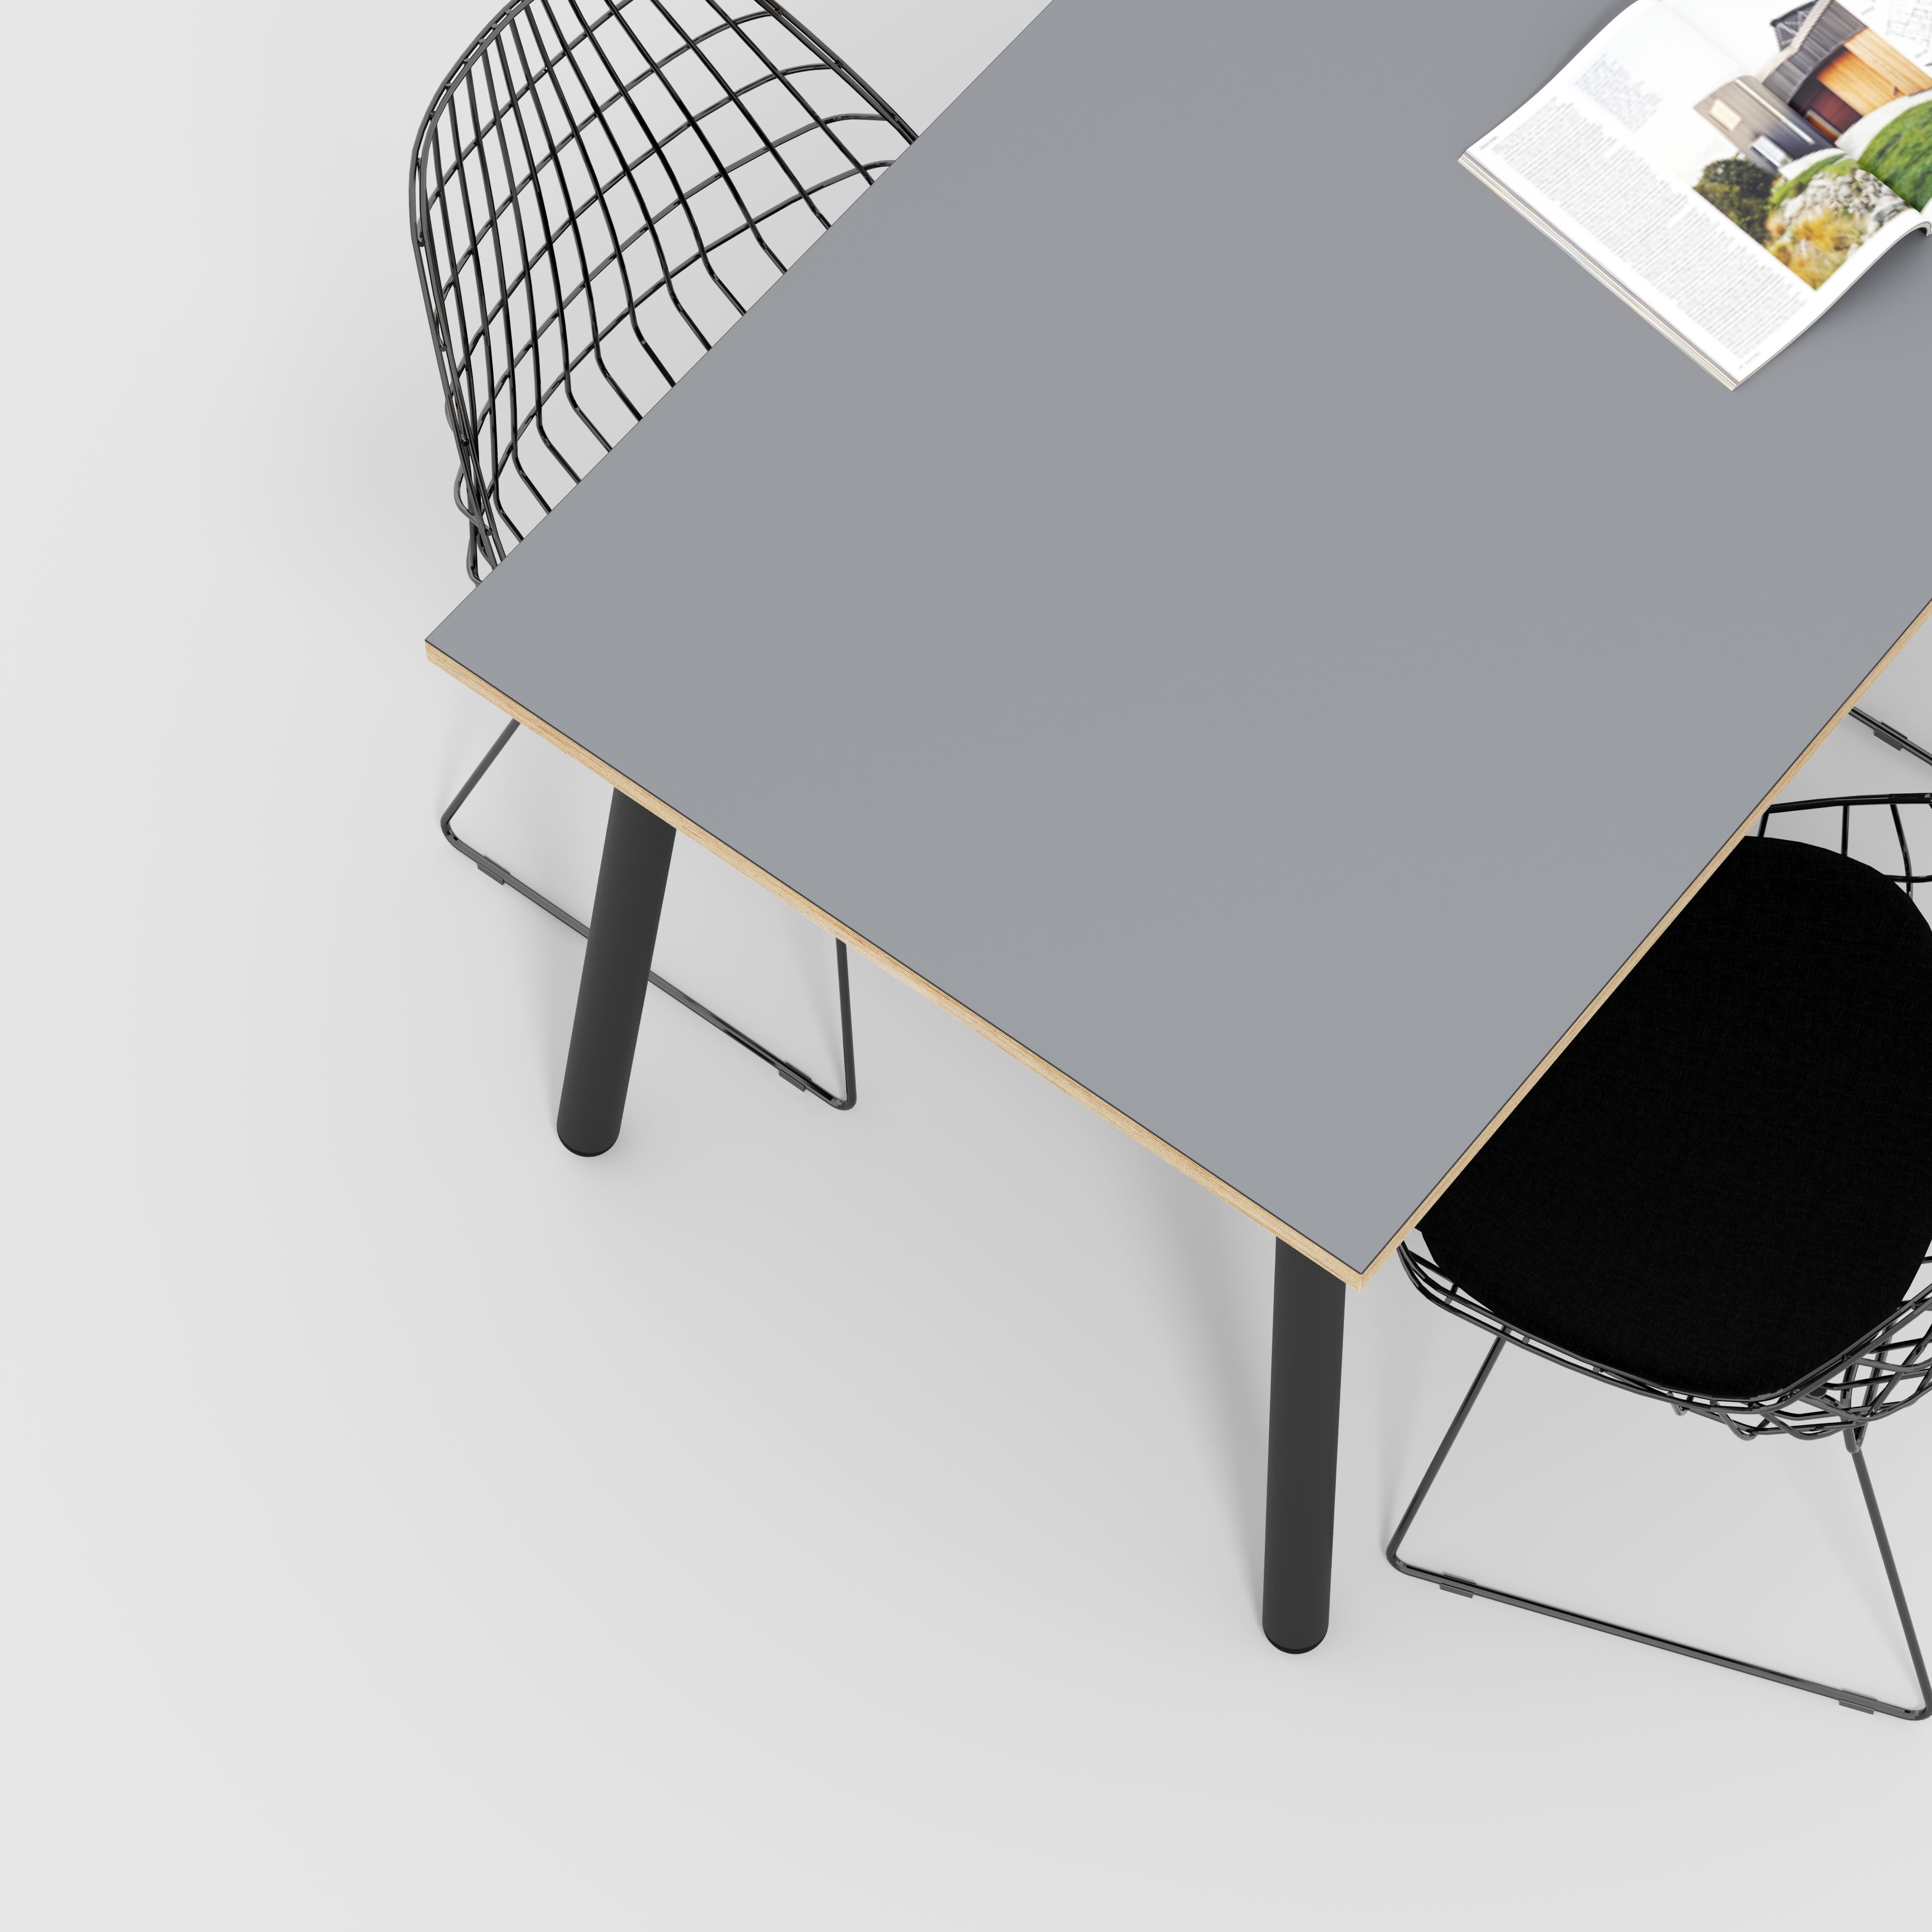 Table with Black Round Single Pin Legs - Formica Tornado Grey - 1600(w) x 800(d) x 735(h)